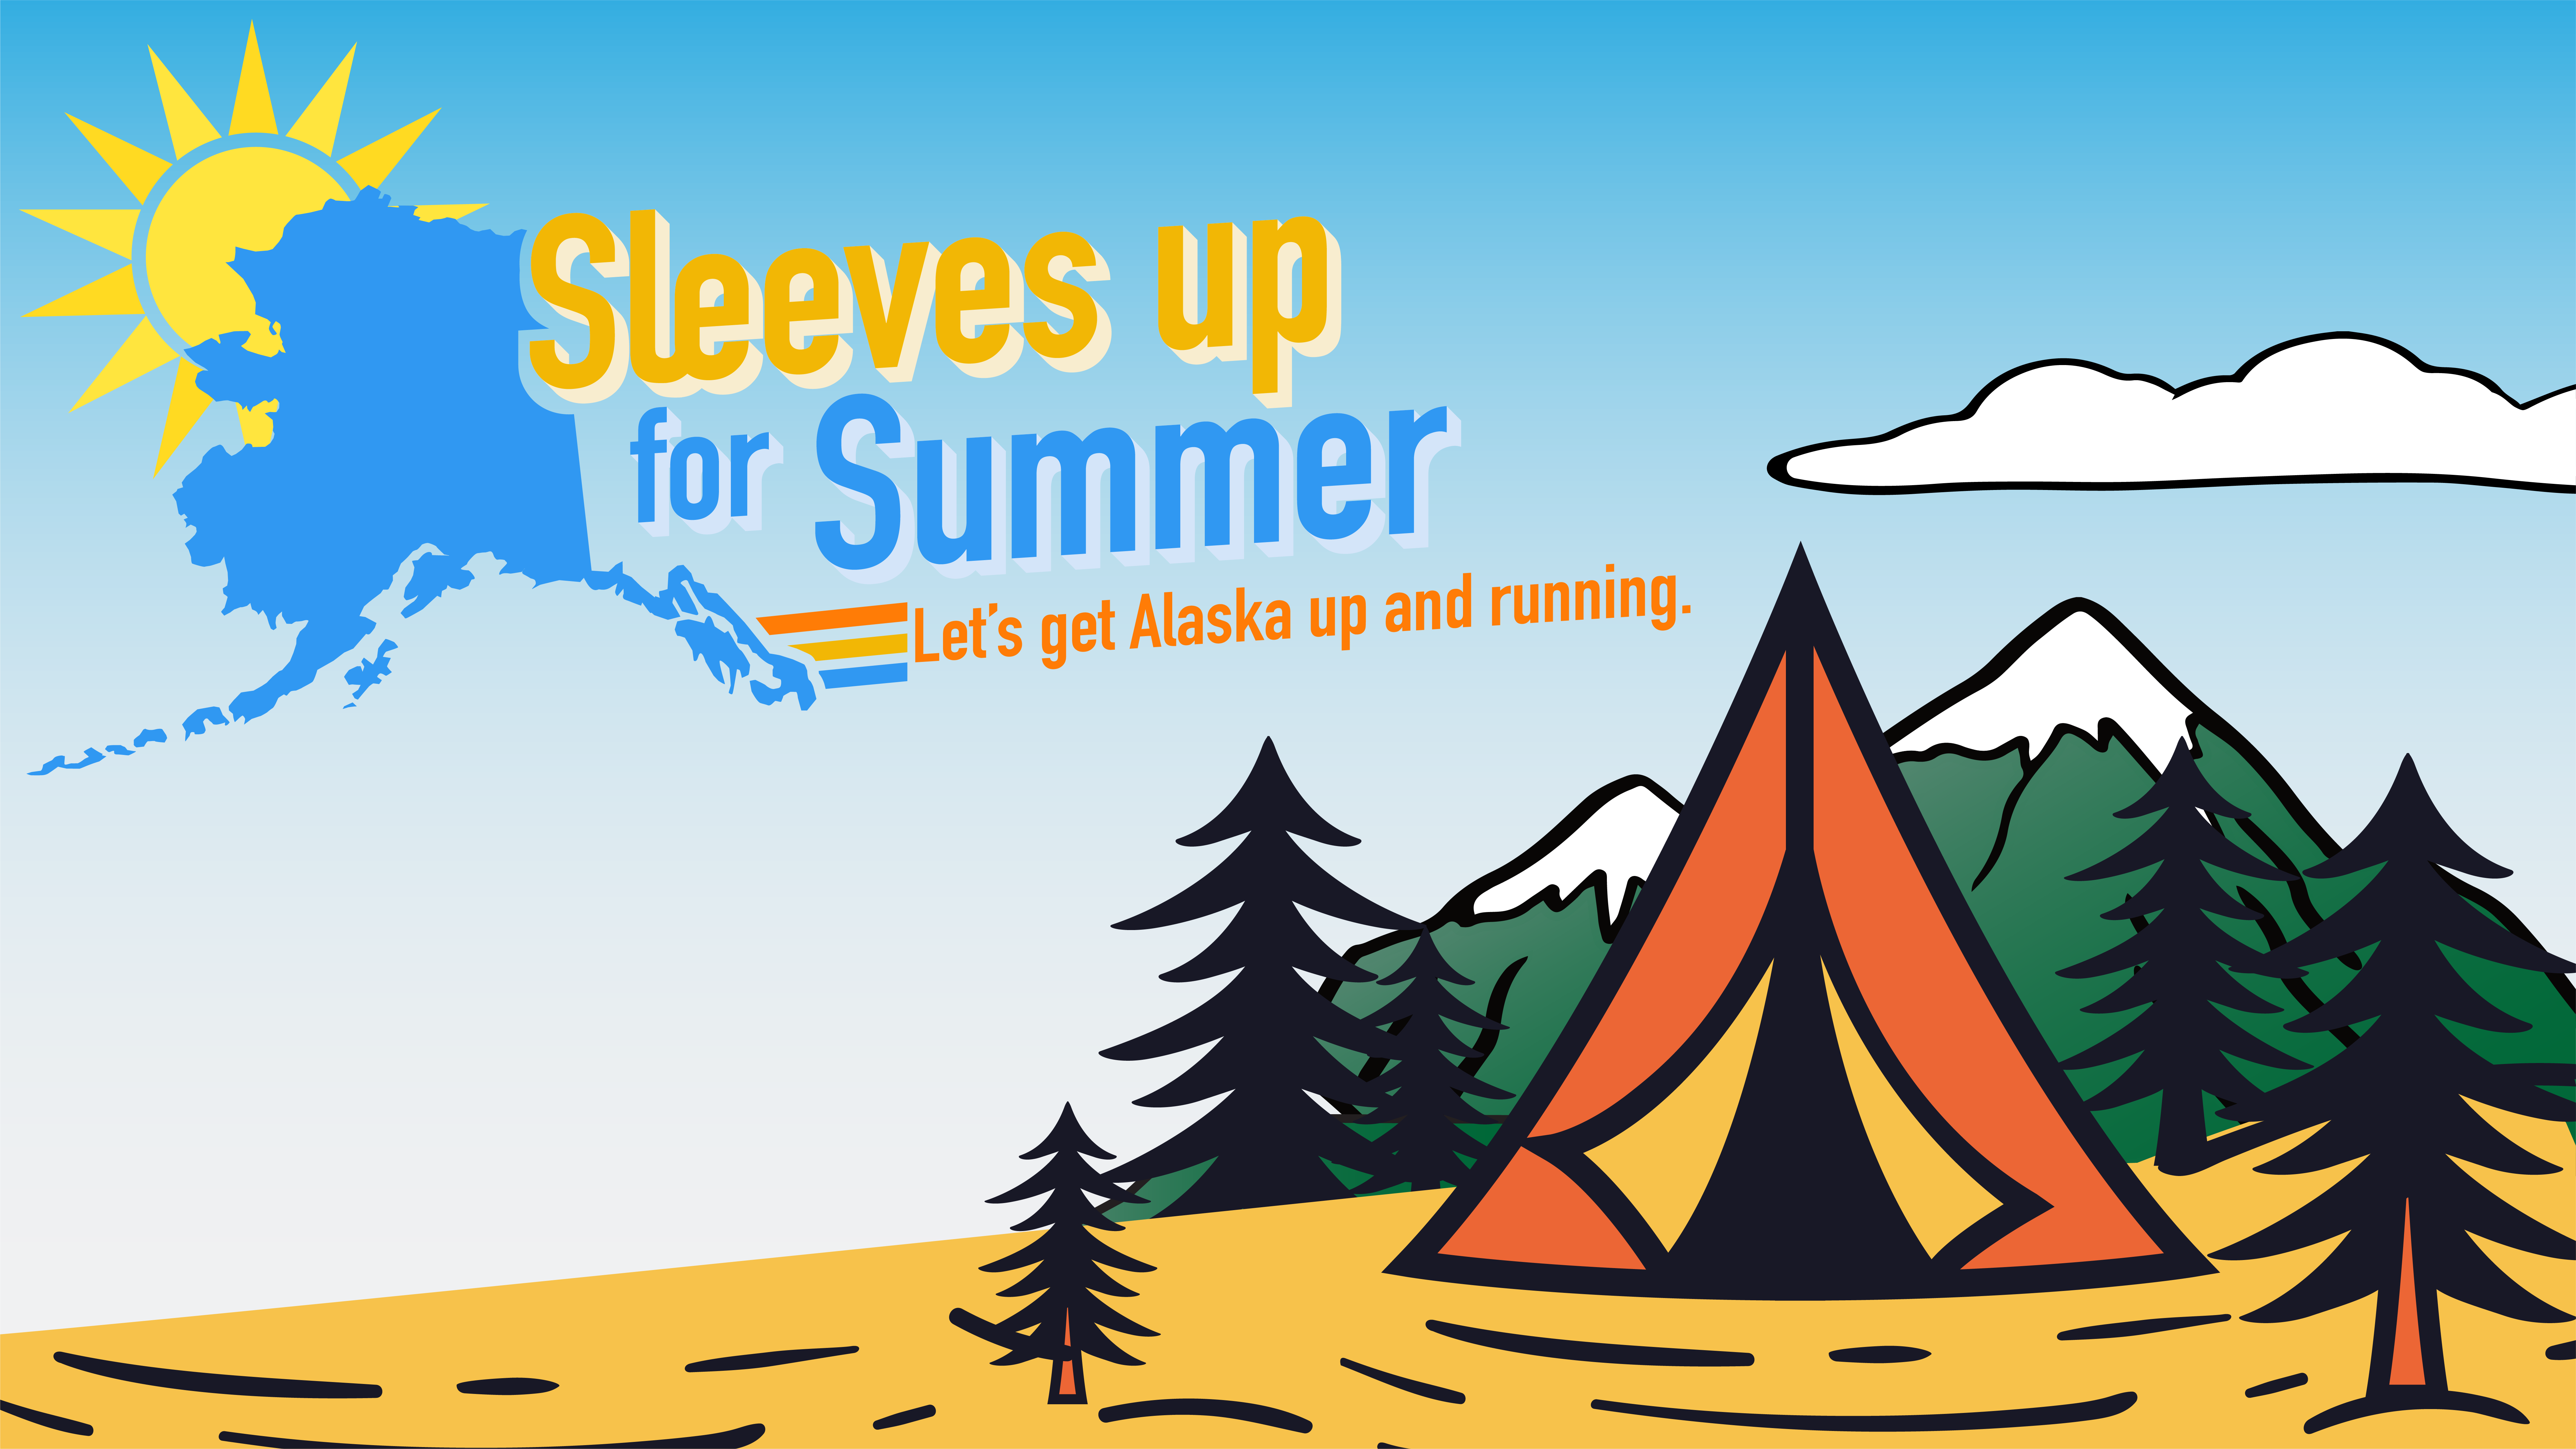 Sleeves up for summer: camping